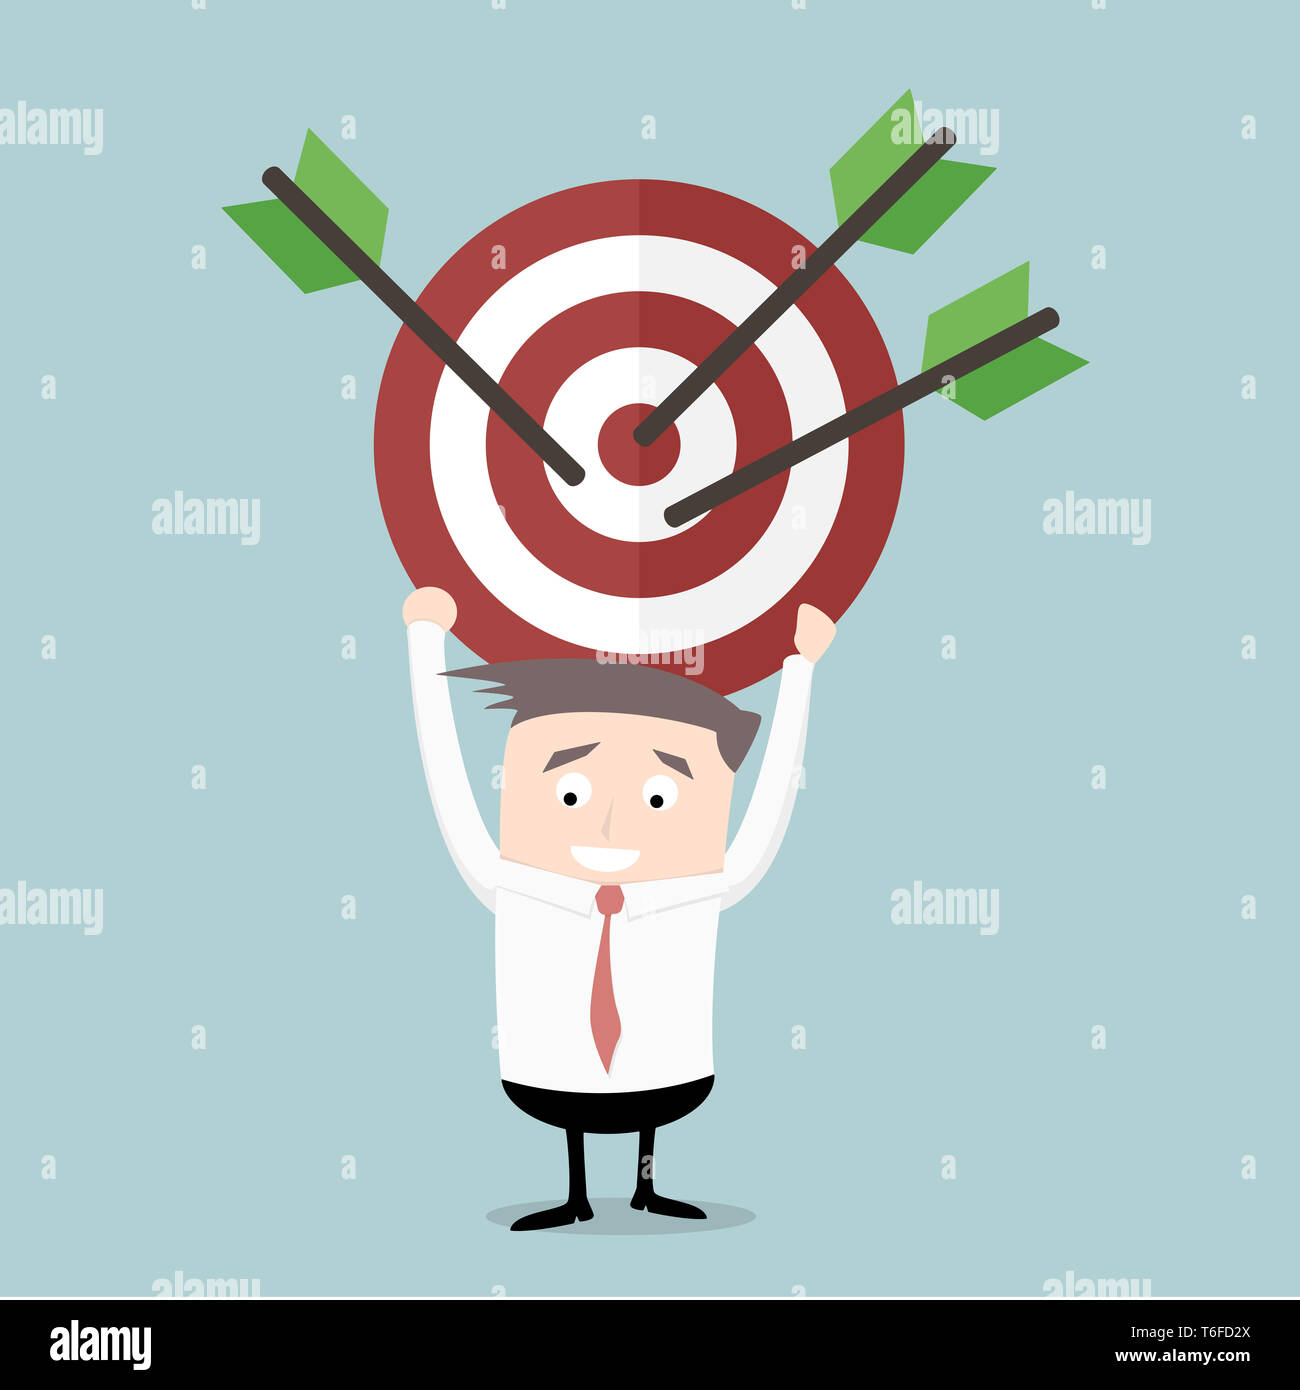 Businessman with Target Stock Photo